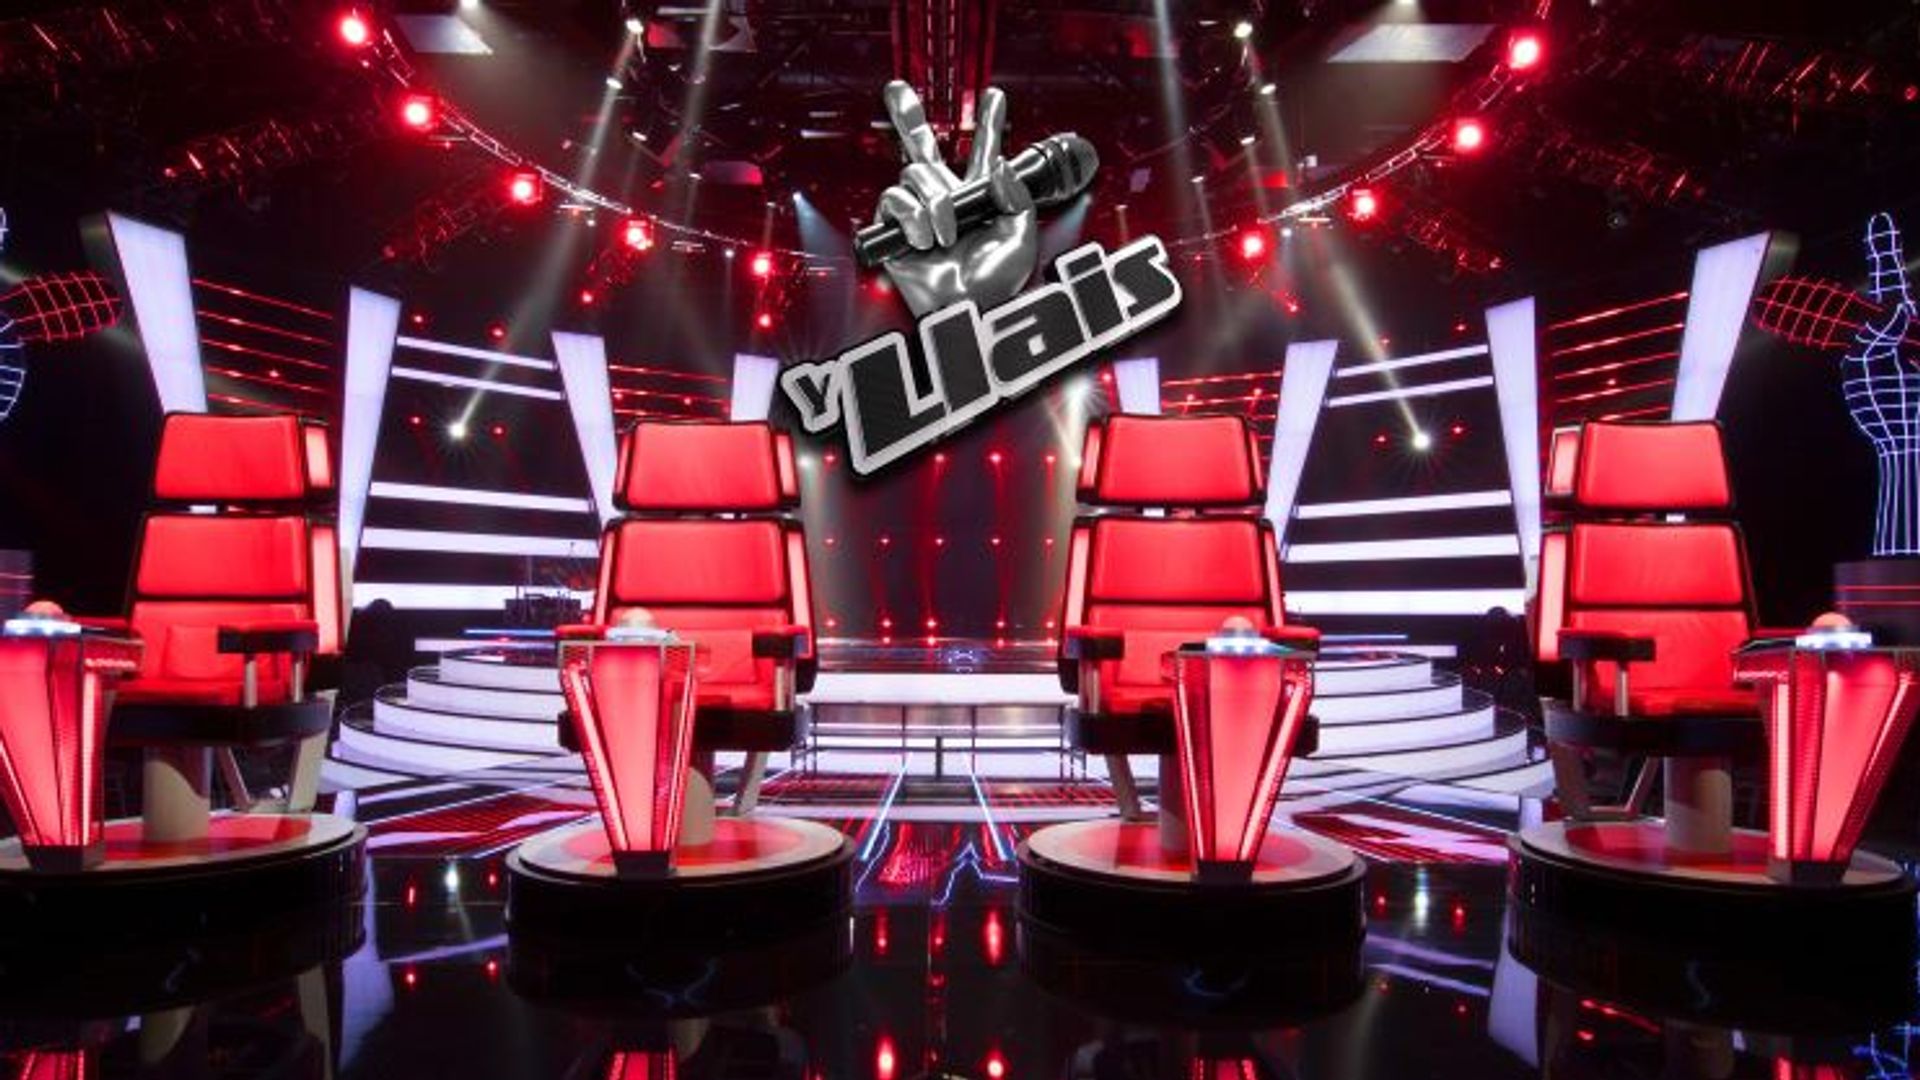 Wales to get own version of The Voice